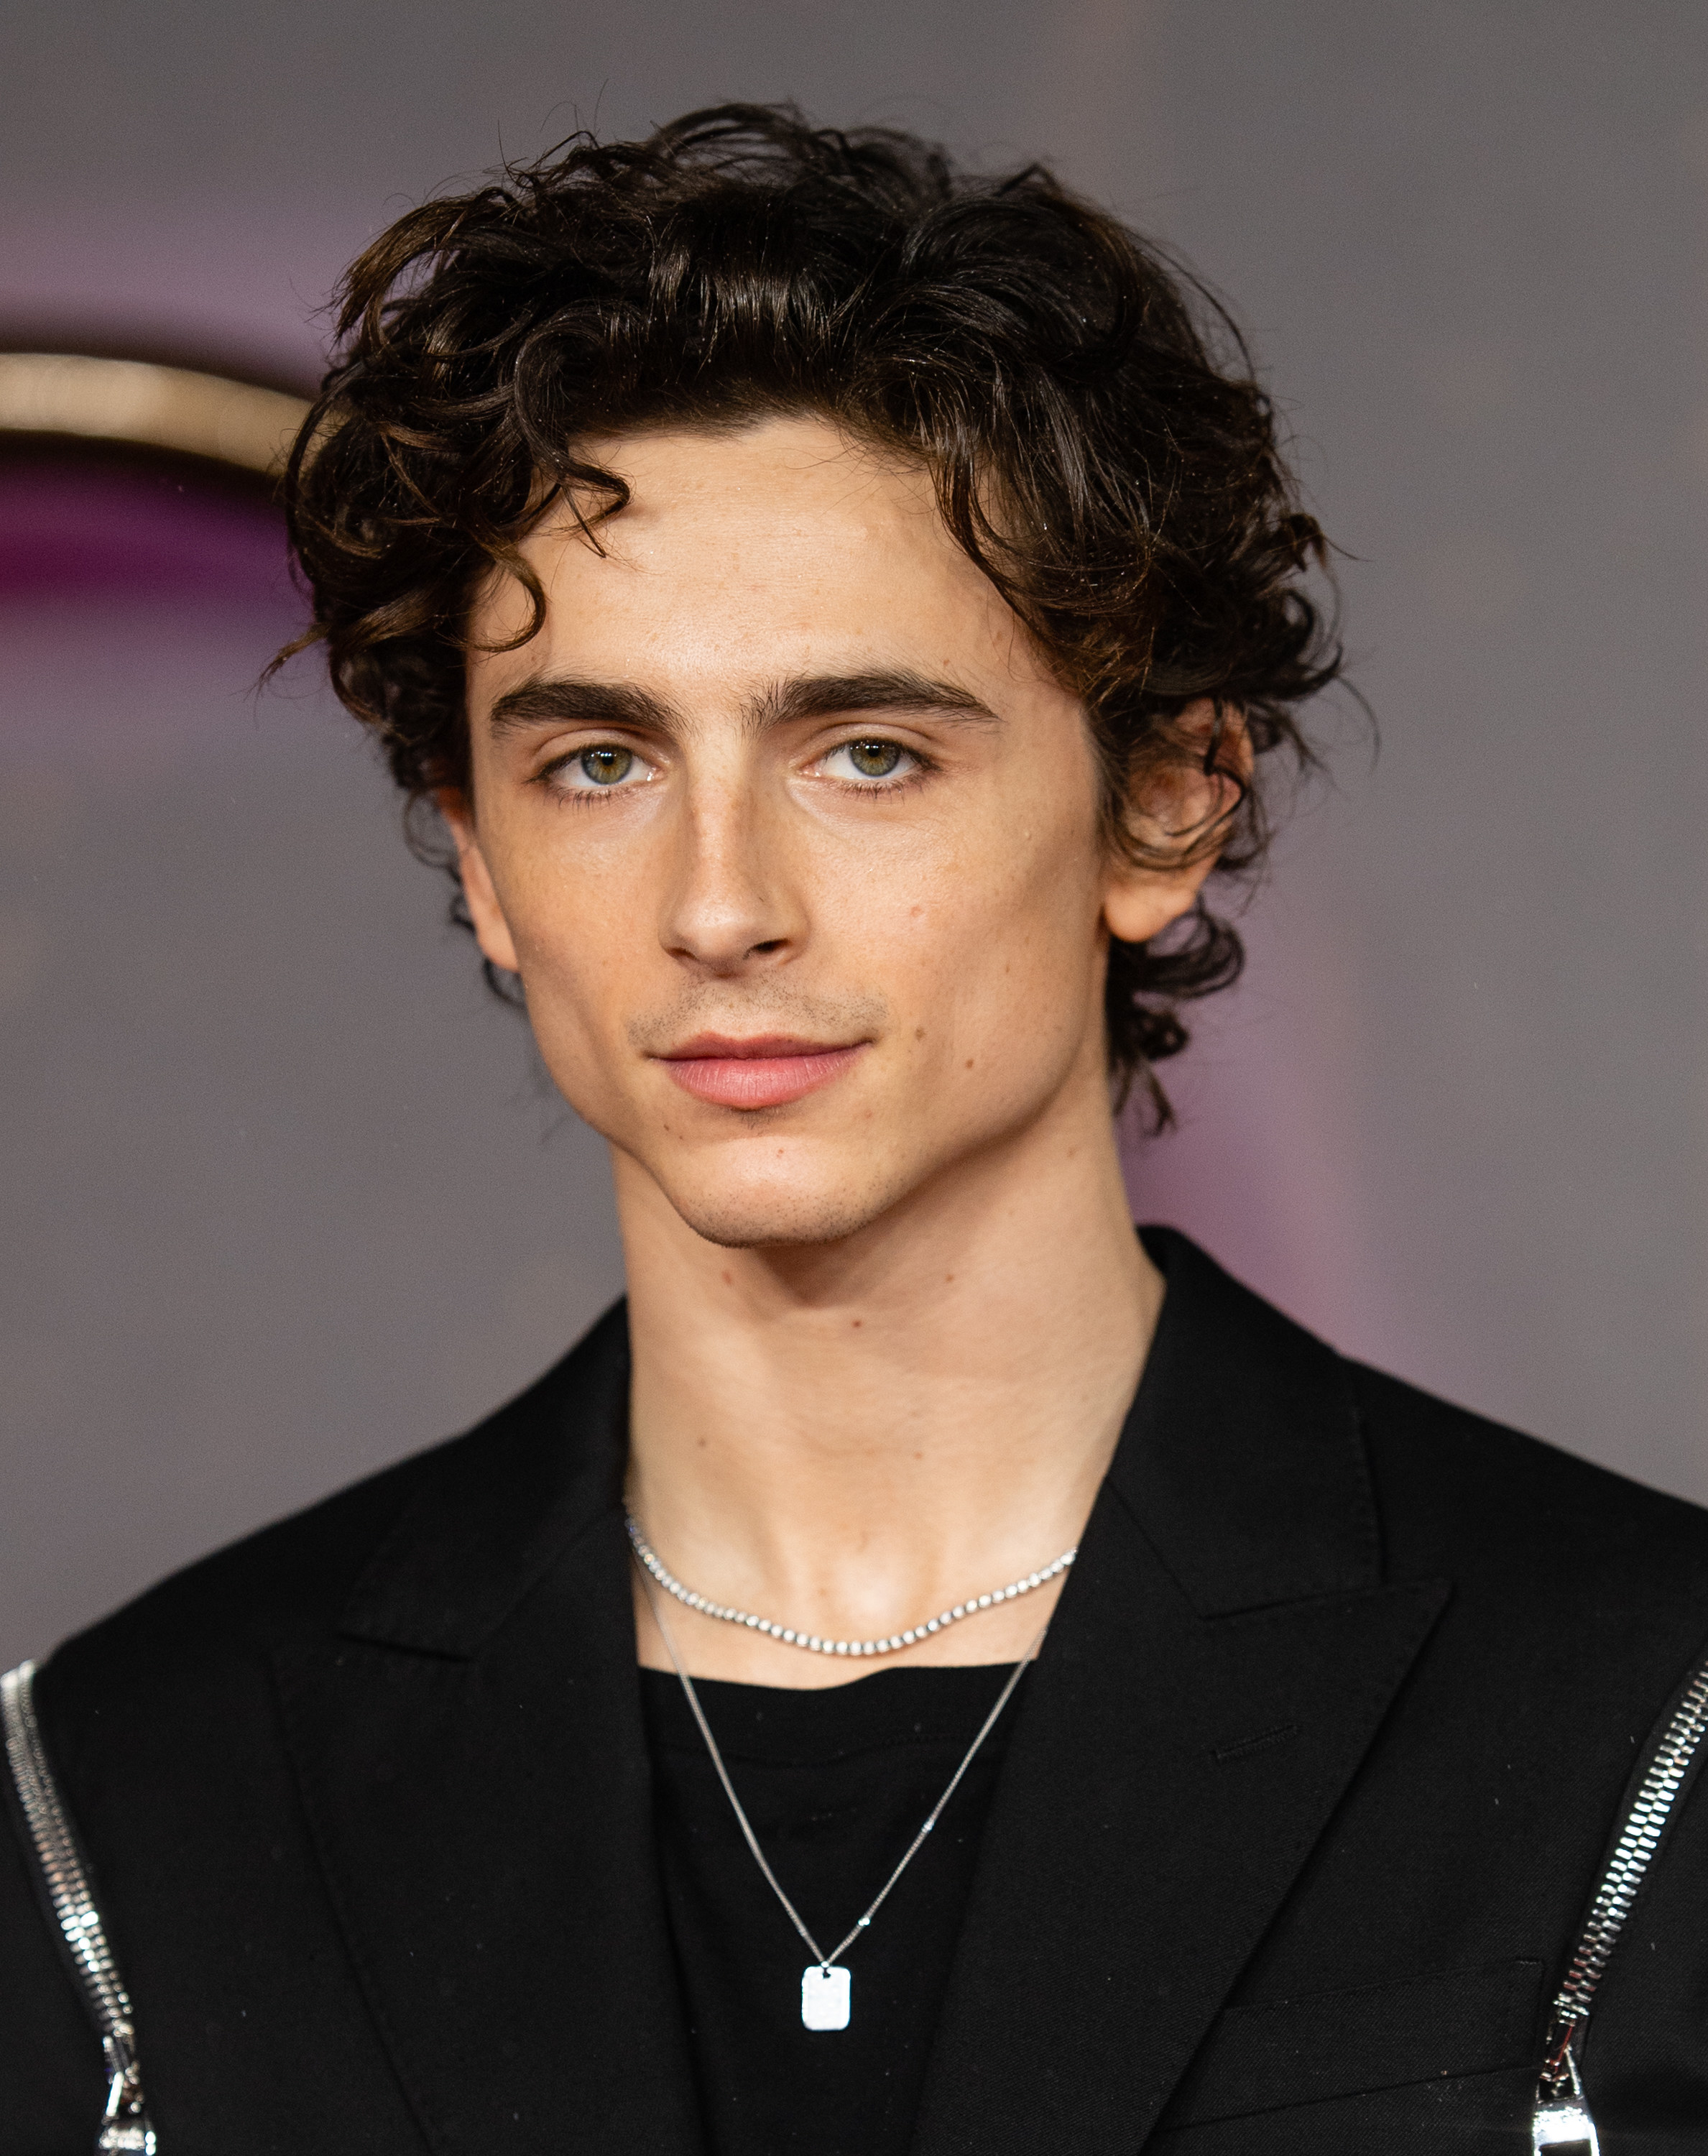 Timothee Chalamet: Dune is a spectacle like LOTR in places ｜ BANG